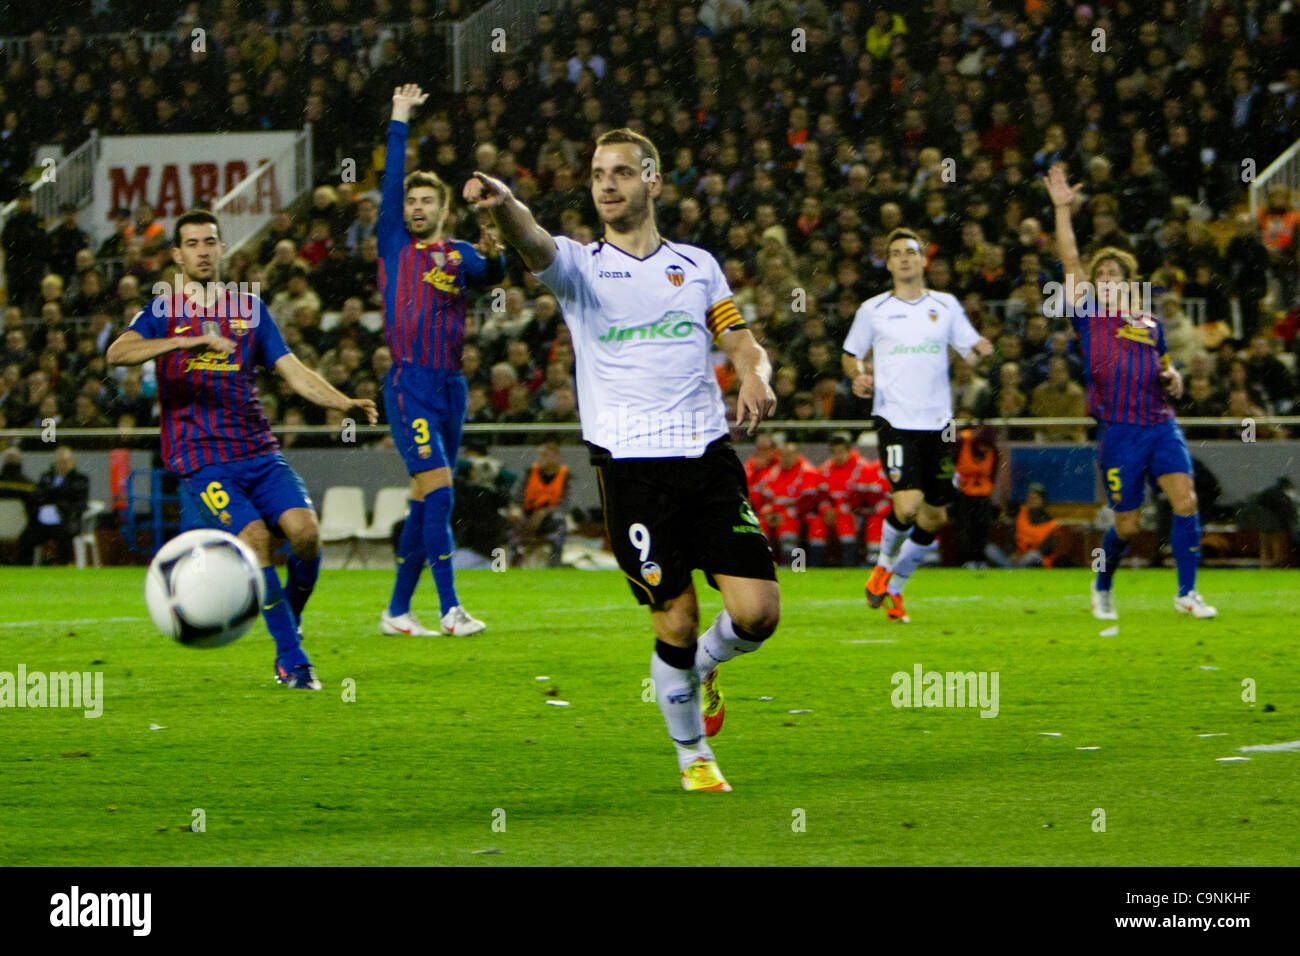 01/02/2011 - VALENCIA, Spain // COPA DEL REY FOOTBALL - Soccer - Valencia CF vs. FC Barcelona - 1/2 finals - Estadio Mestalla -------- Players try to influenciate the linier after the ball was shot away from the soccer field Stock Photo